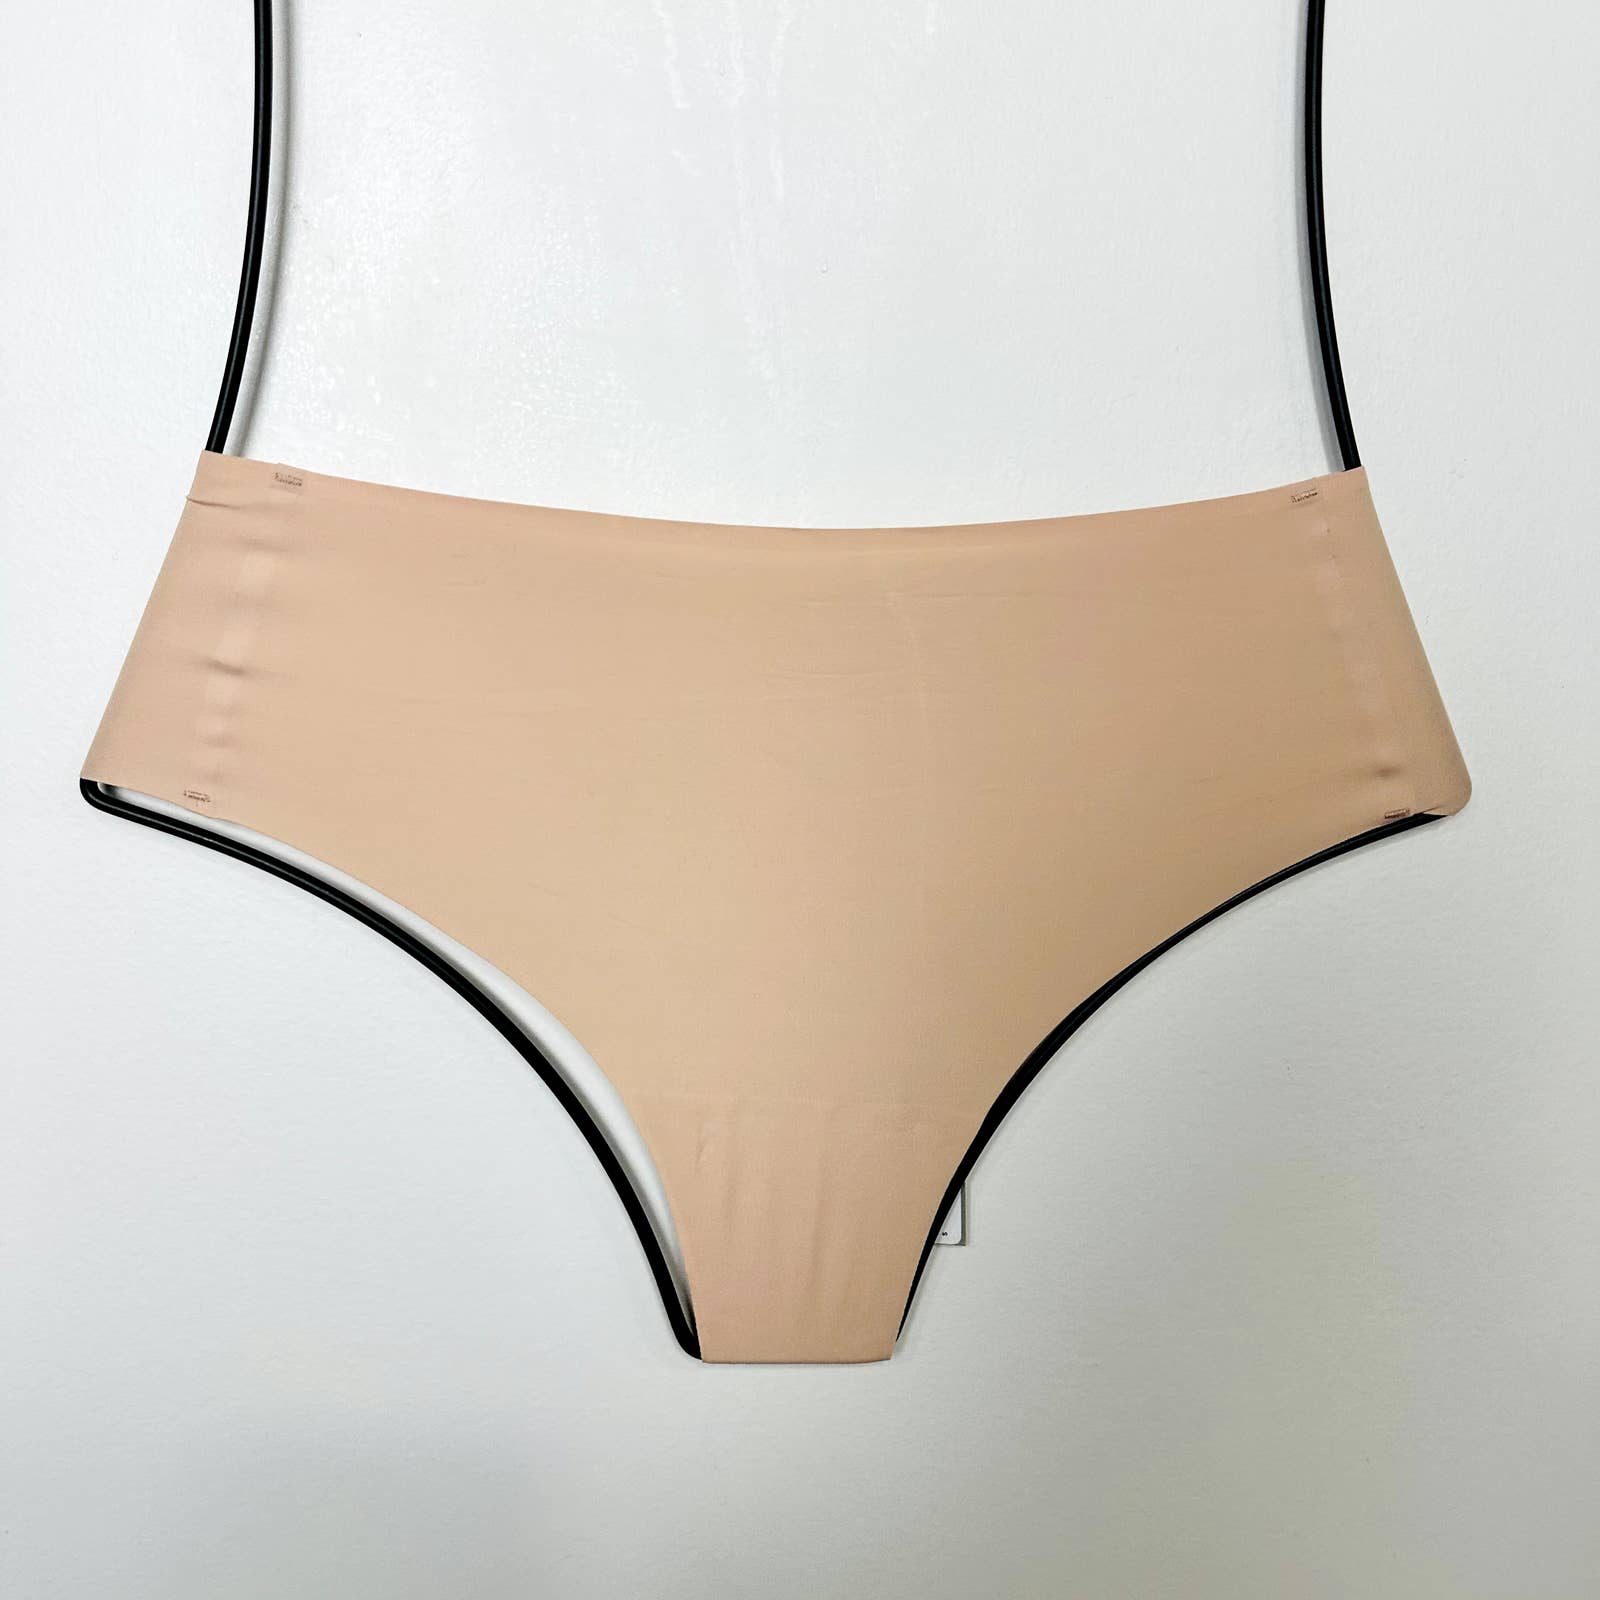 Everlane NWT The ReNew Seamless Stretch Low Rise Thong Panty Light Tan Sz Small